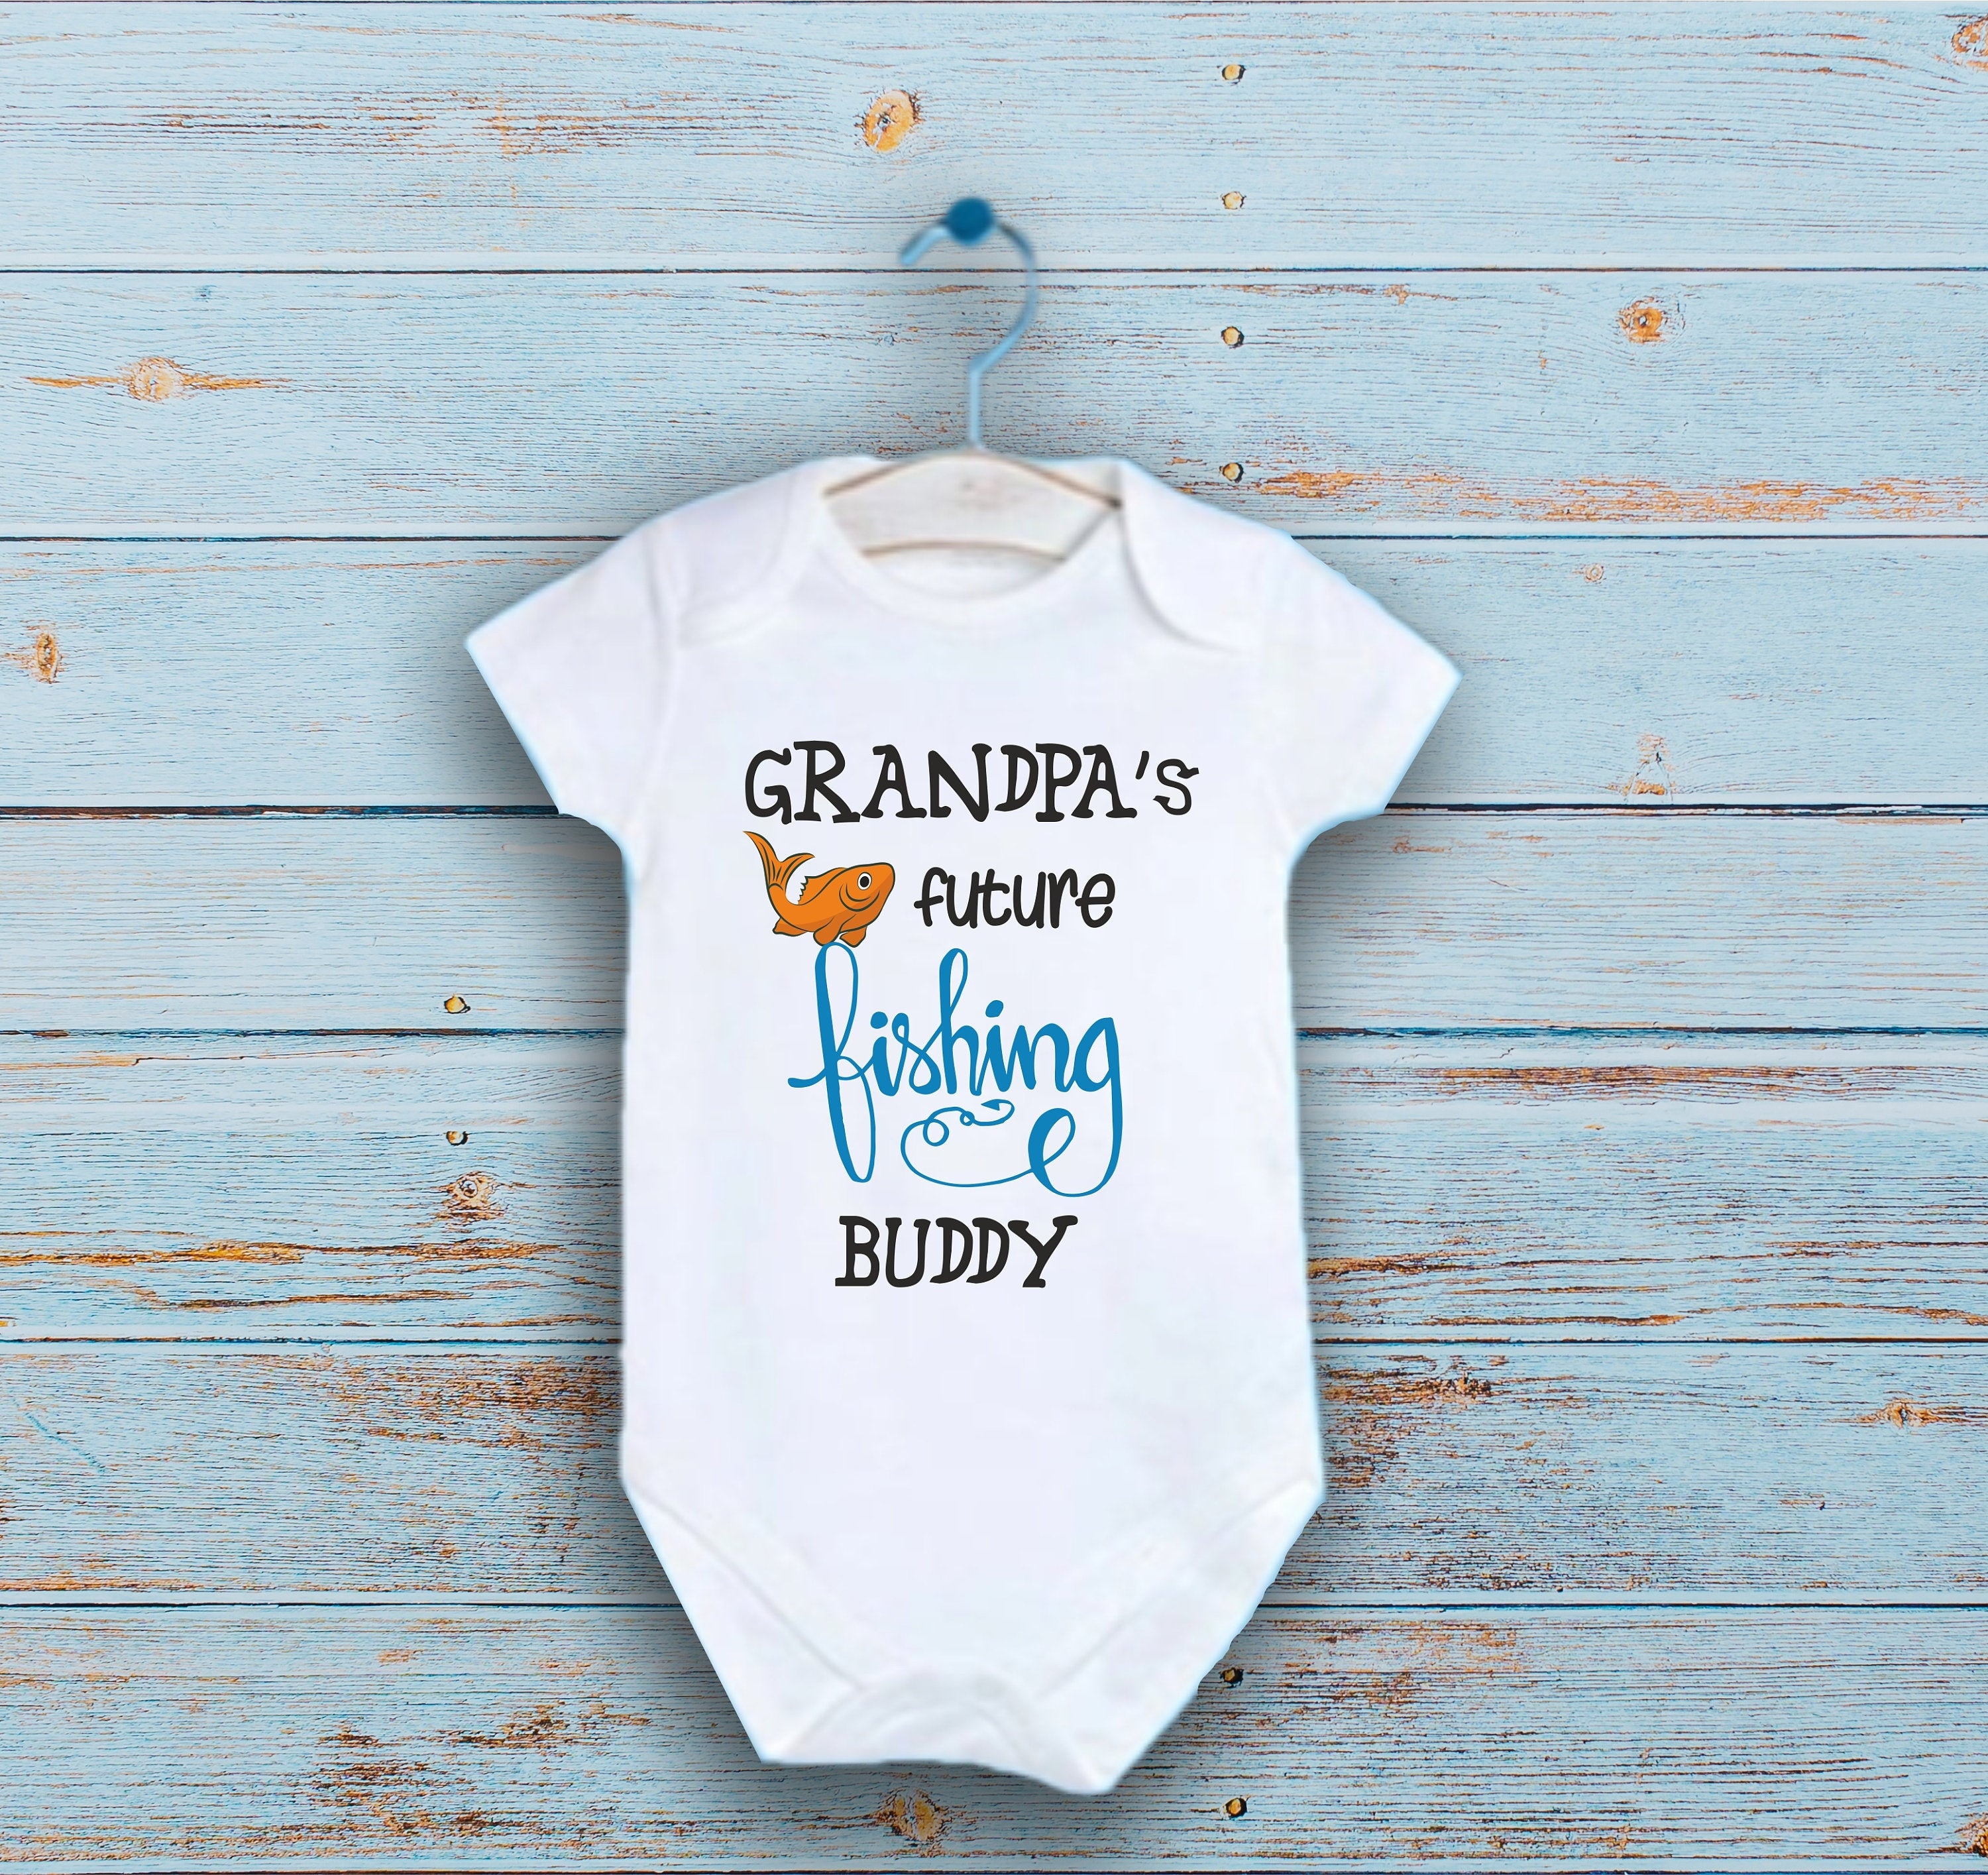 Grandpa's Fishing Buddy Baby Onesie®, Future Fisherman Baby Bodysuit, New  Grandfather Gift, I'd Rather Be Fishing, Pregnancy Announcement -   Canada